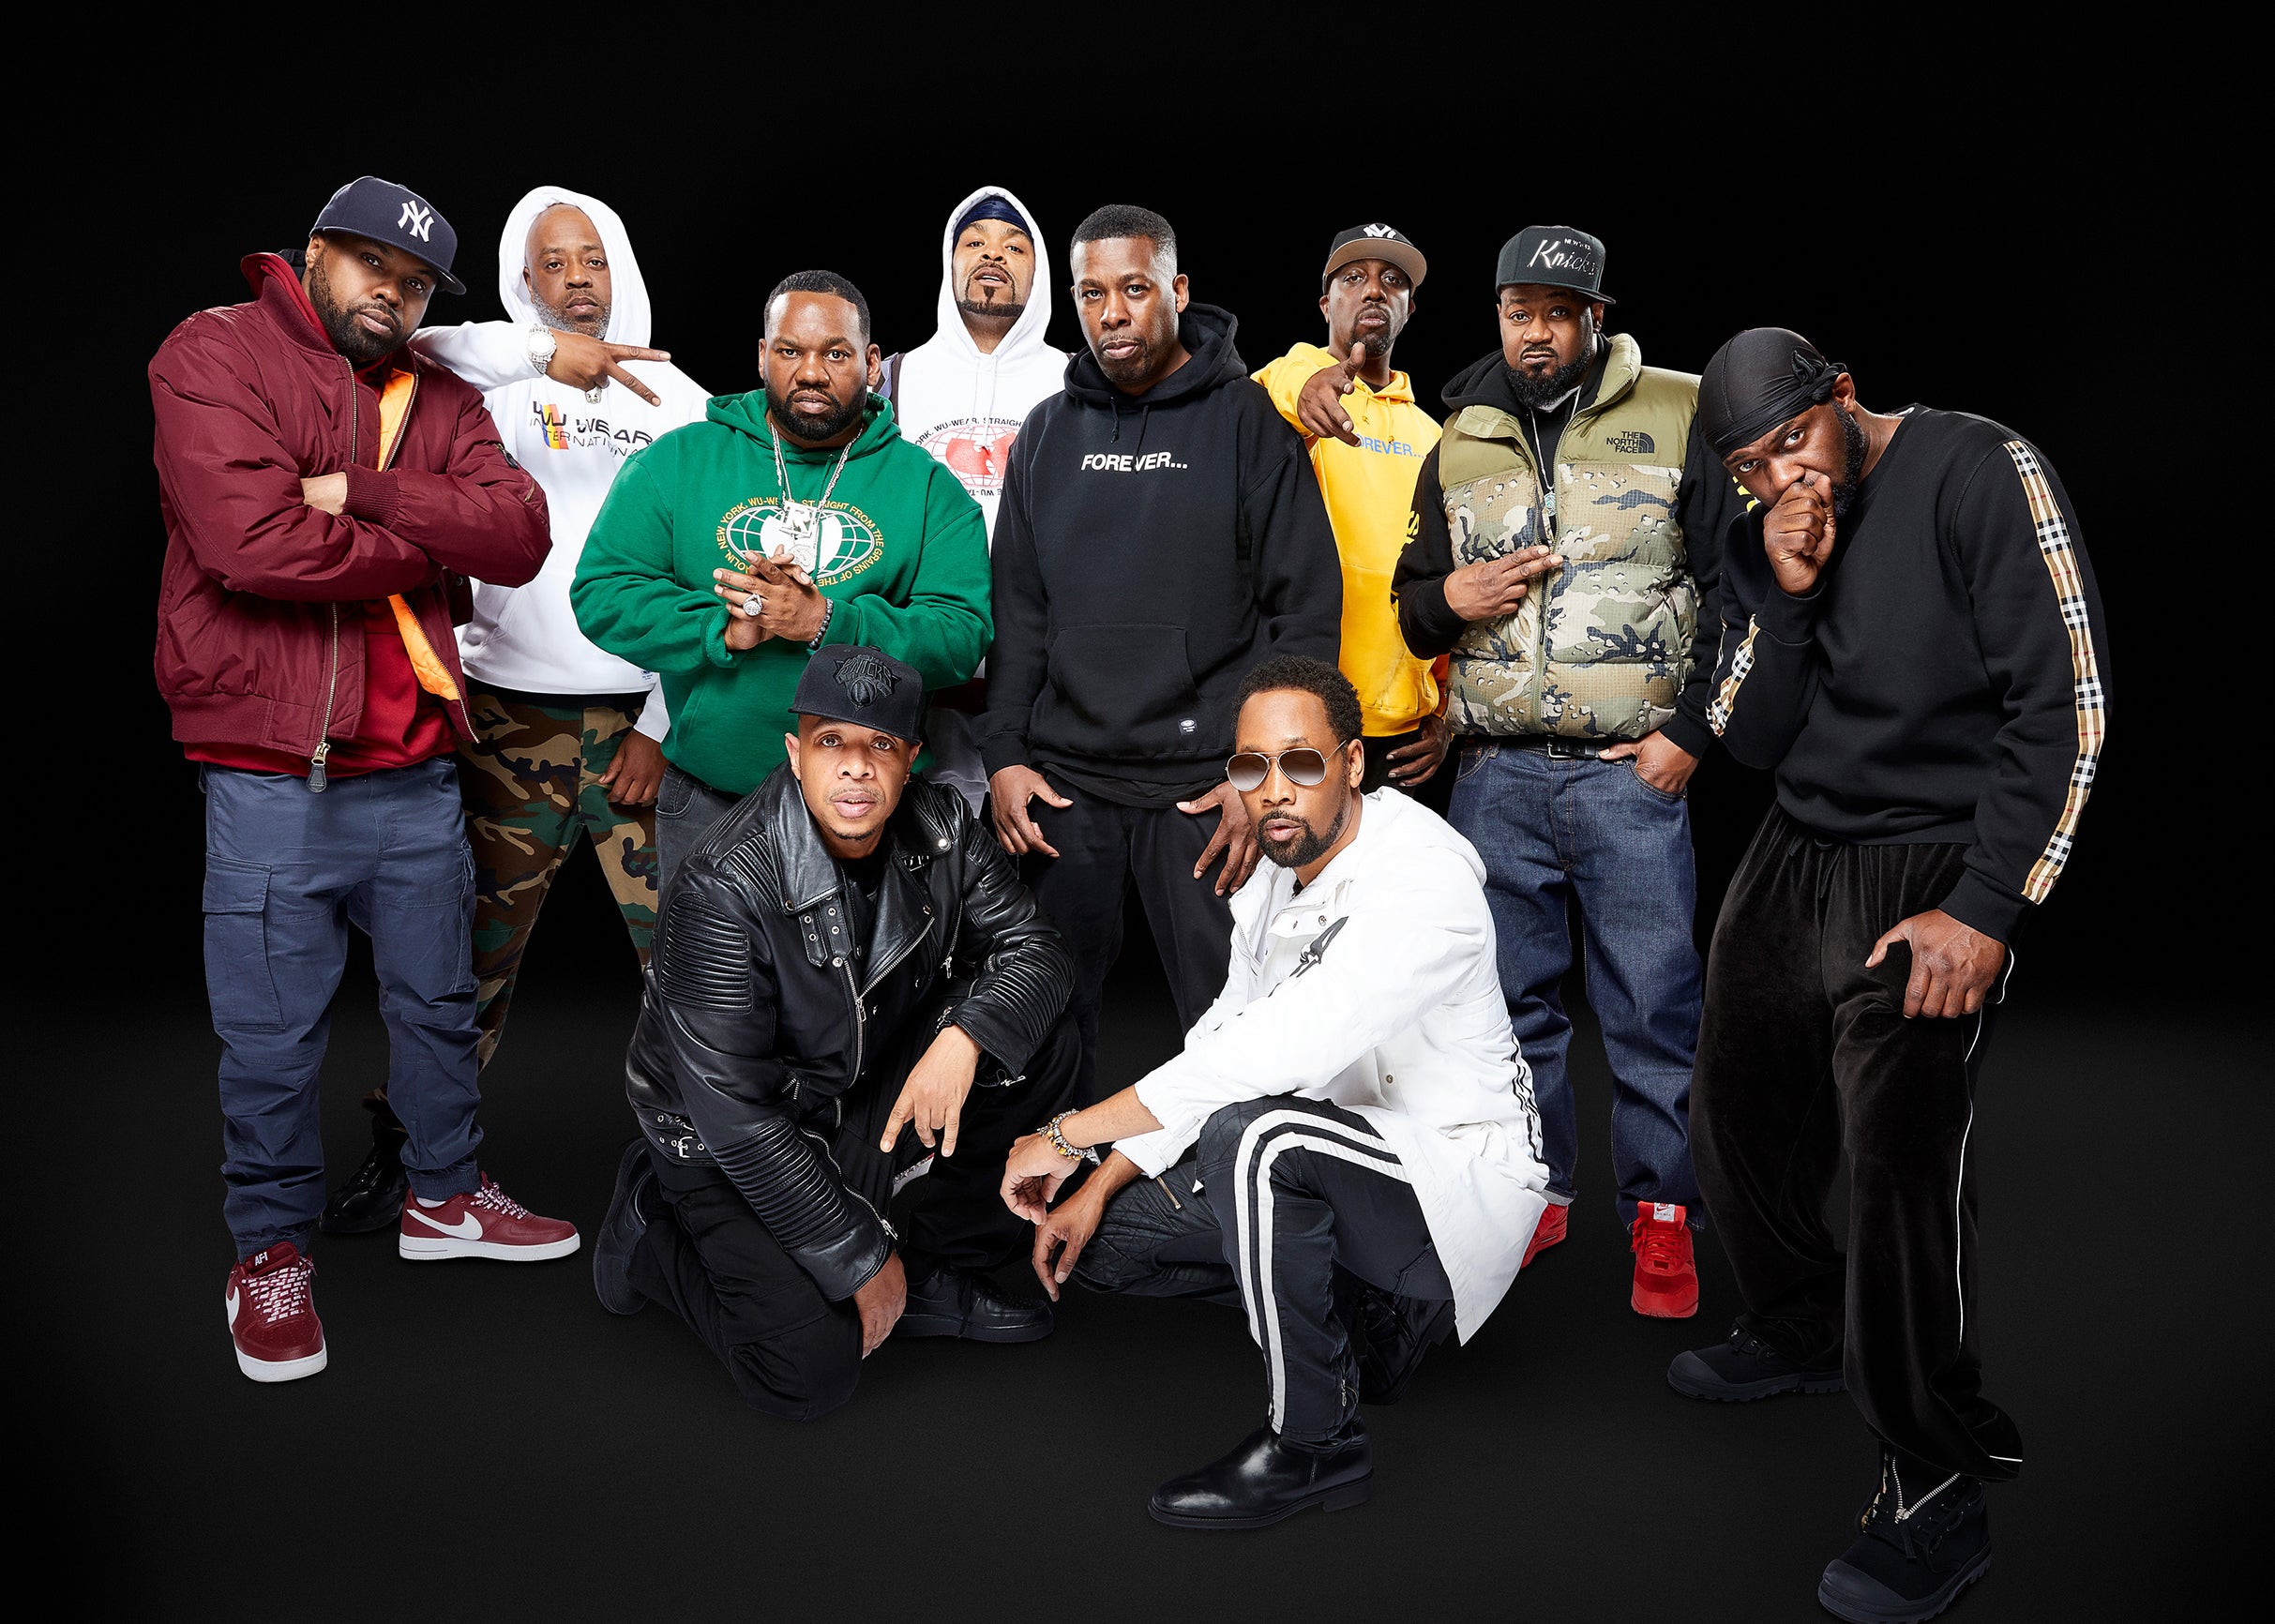 Wu-Tang Clan & Nas: NY State Of Mind Tour free presale listing for performance tickets in Toronto, ON (Scotiabank Arena)